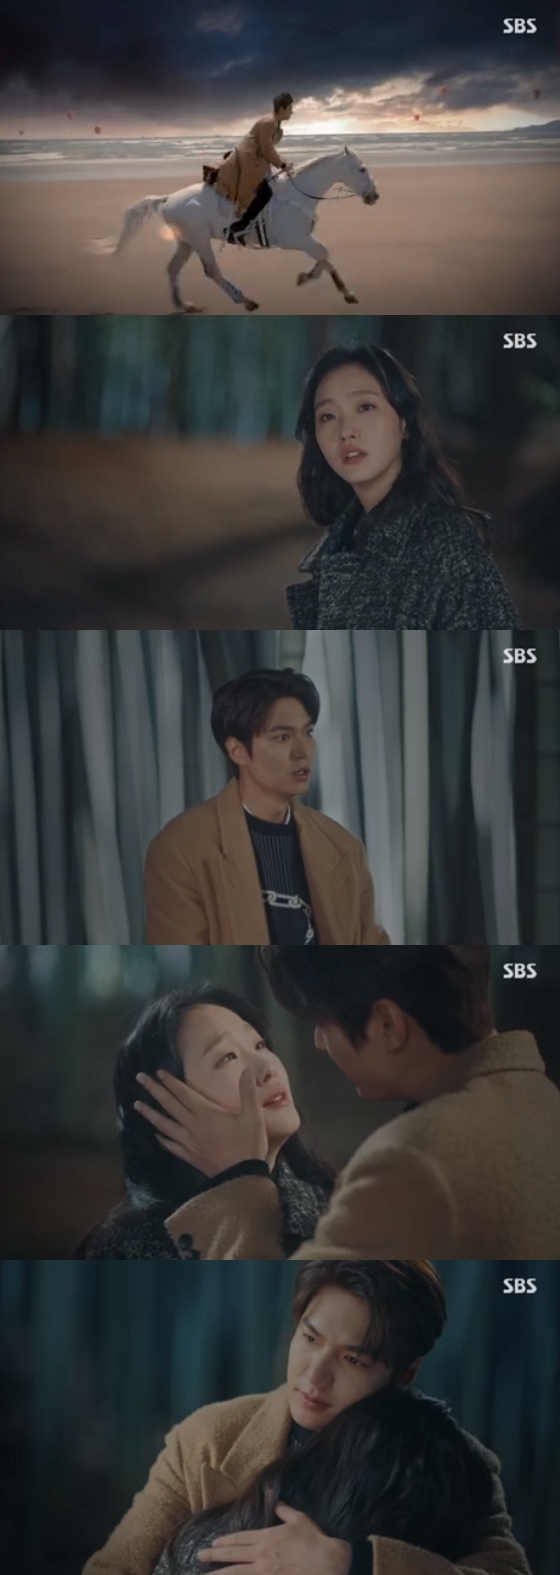 Kim Go-eun and Lee Min-ho do a grieving The Slap as they wept.In SBSs The King - Eternal Monarch broadcast on the 16th, Lee Min-ho and Kim Go-euns great Slap were released.On this day, Igon and Jung Tae-eul headed to bamboo forests with extreme longing.Jung Tae-eun, who laughed while looking across the bamboo forest with his eyes, looked at Lee, who appeared on Maximus, and was surprised to find his mouth.Jung Tae-eun, who discovered Igon, ran with tears that flowed down like an explosion and asked, Is it now? Is it really here?Igon hugged her and said, Not yet. I missed you so much. I was going to hear your voice.Lee and Jung Tae-eul were saddened by the longing of the longing to shed tears and continued to embrace the heartfelt embrace.